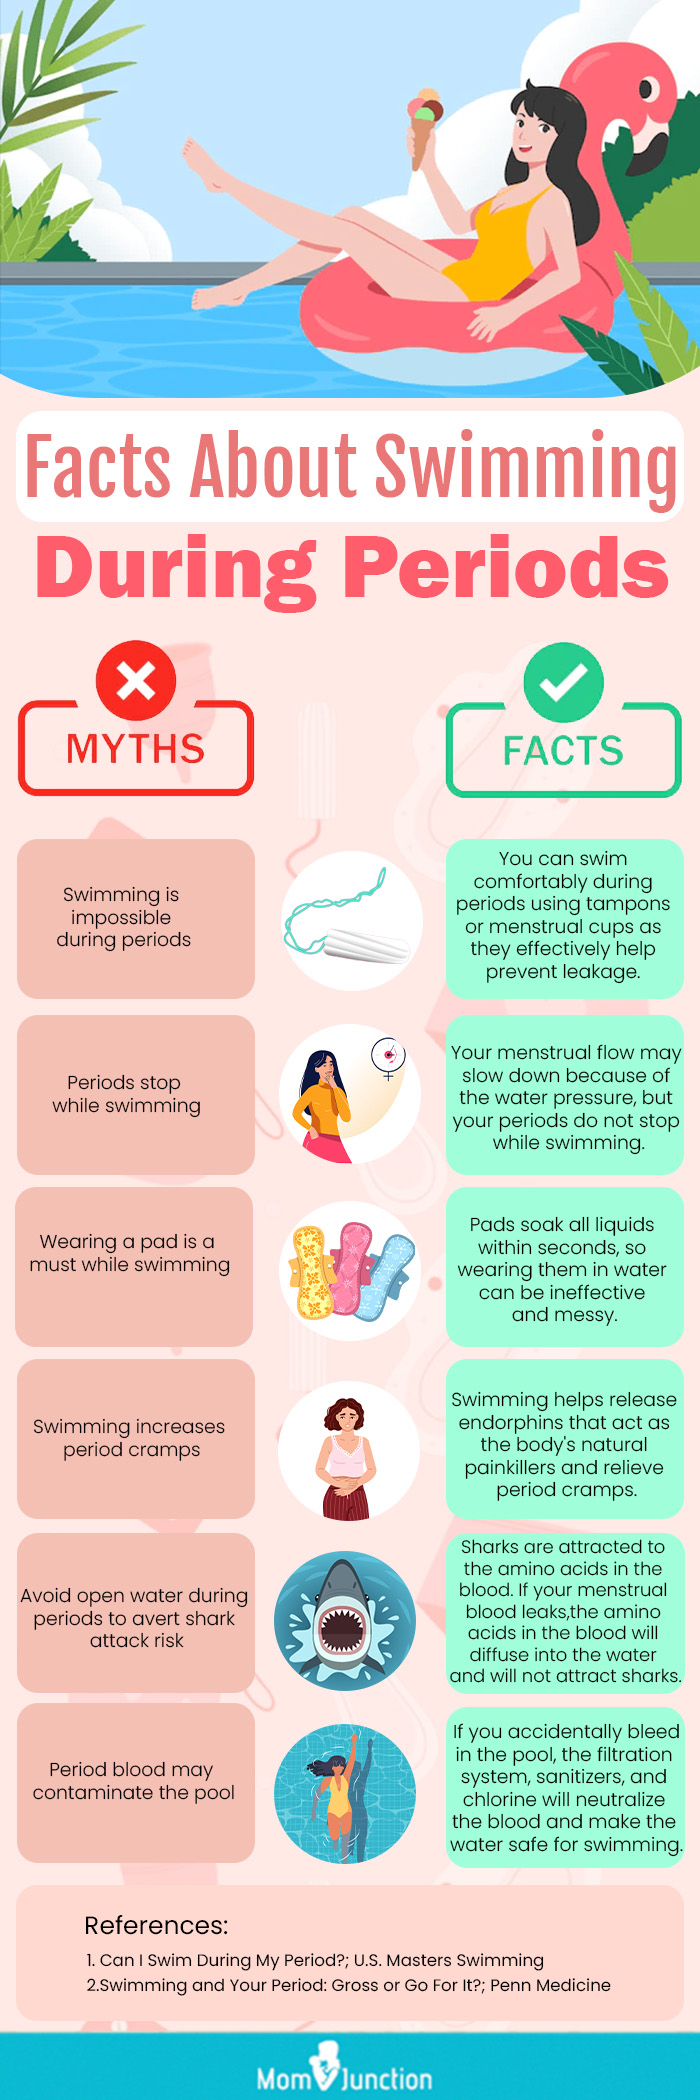 facts about swimming during periods [infographic]